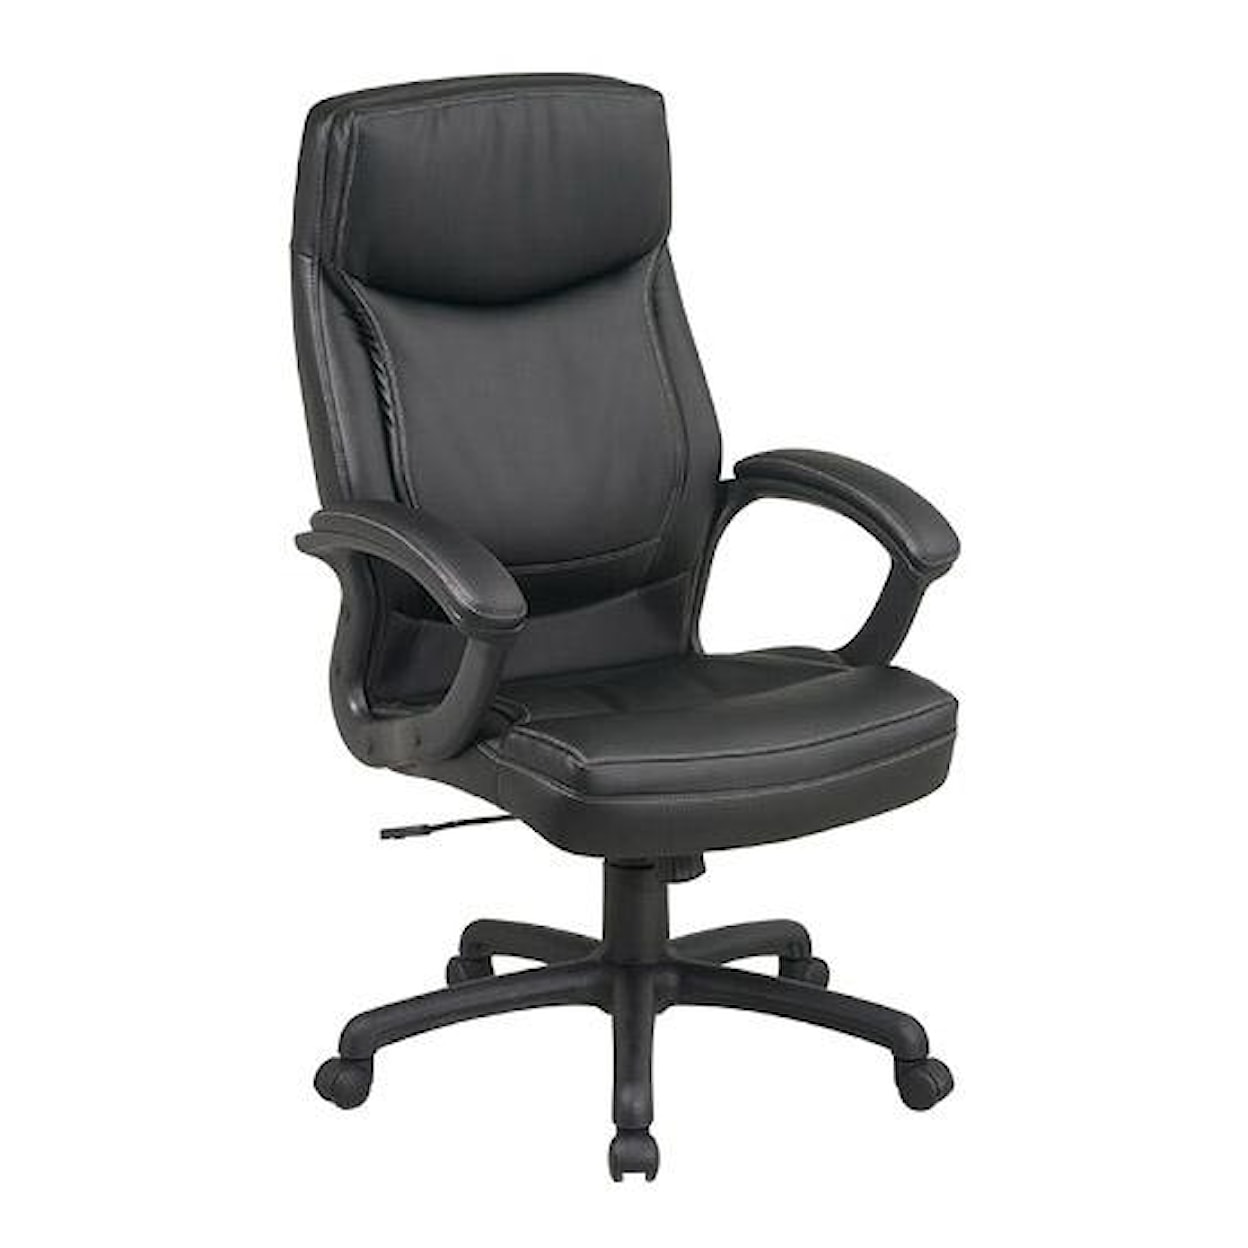 Office Star Executive Eco Leather Chairs Eco Leather Chair